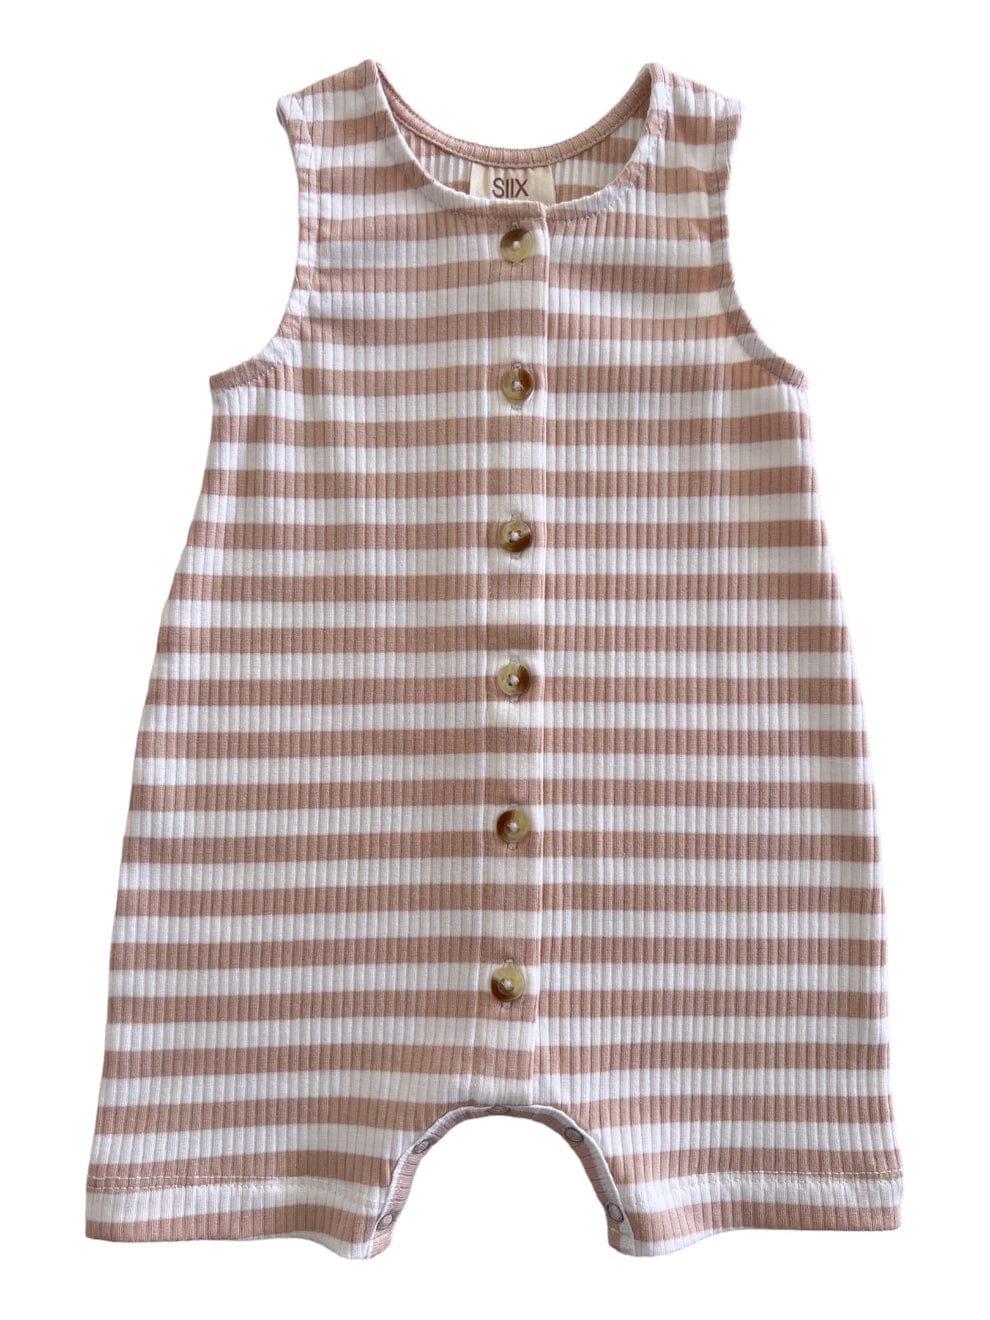 Siix Collection Baby Romper SIIX Collection Organic Ribbed Bay Short Jumpsuit (Tan Stripe)